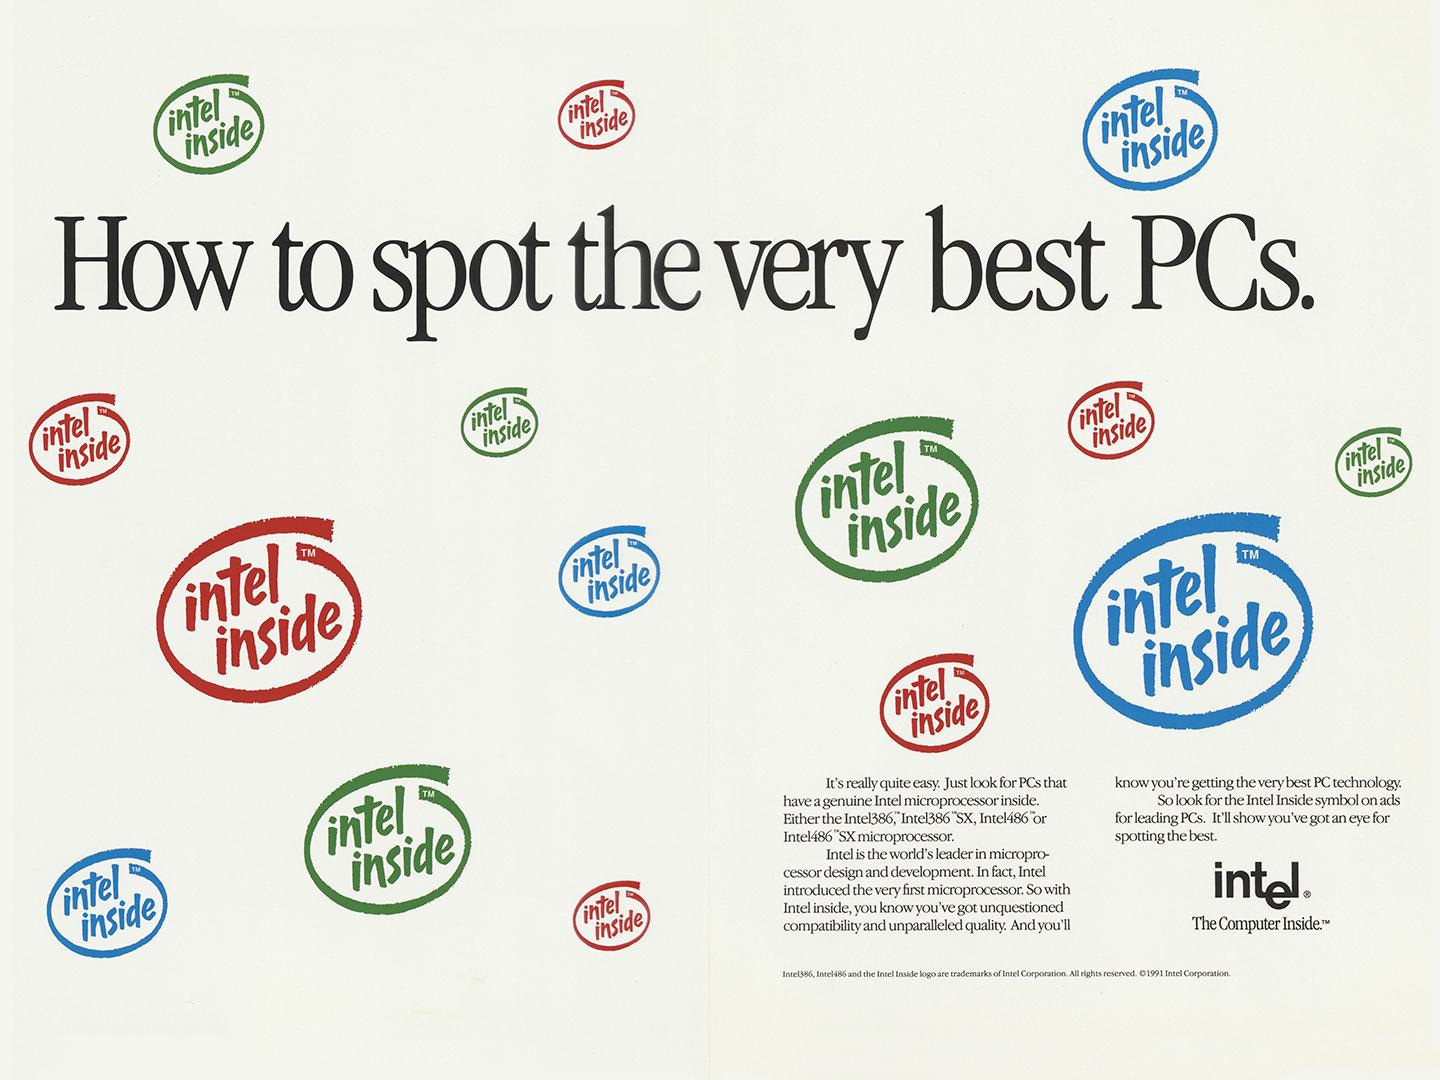 Intel print ad from 1991